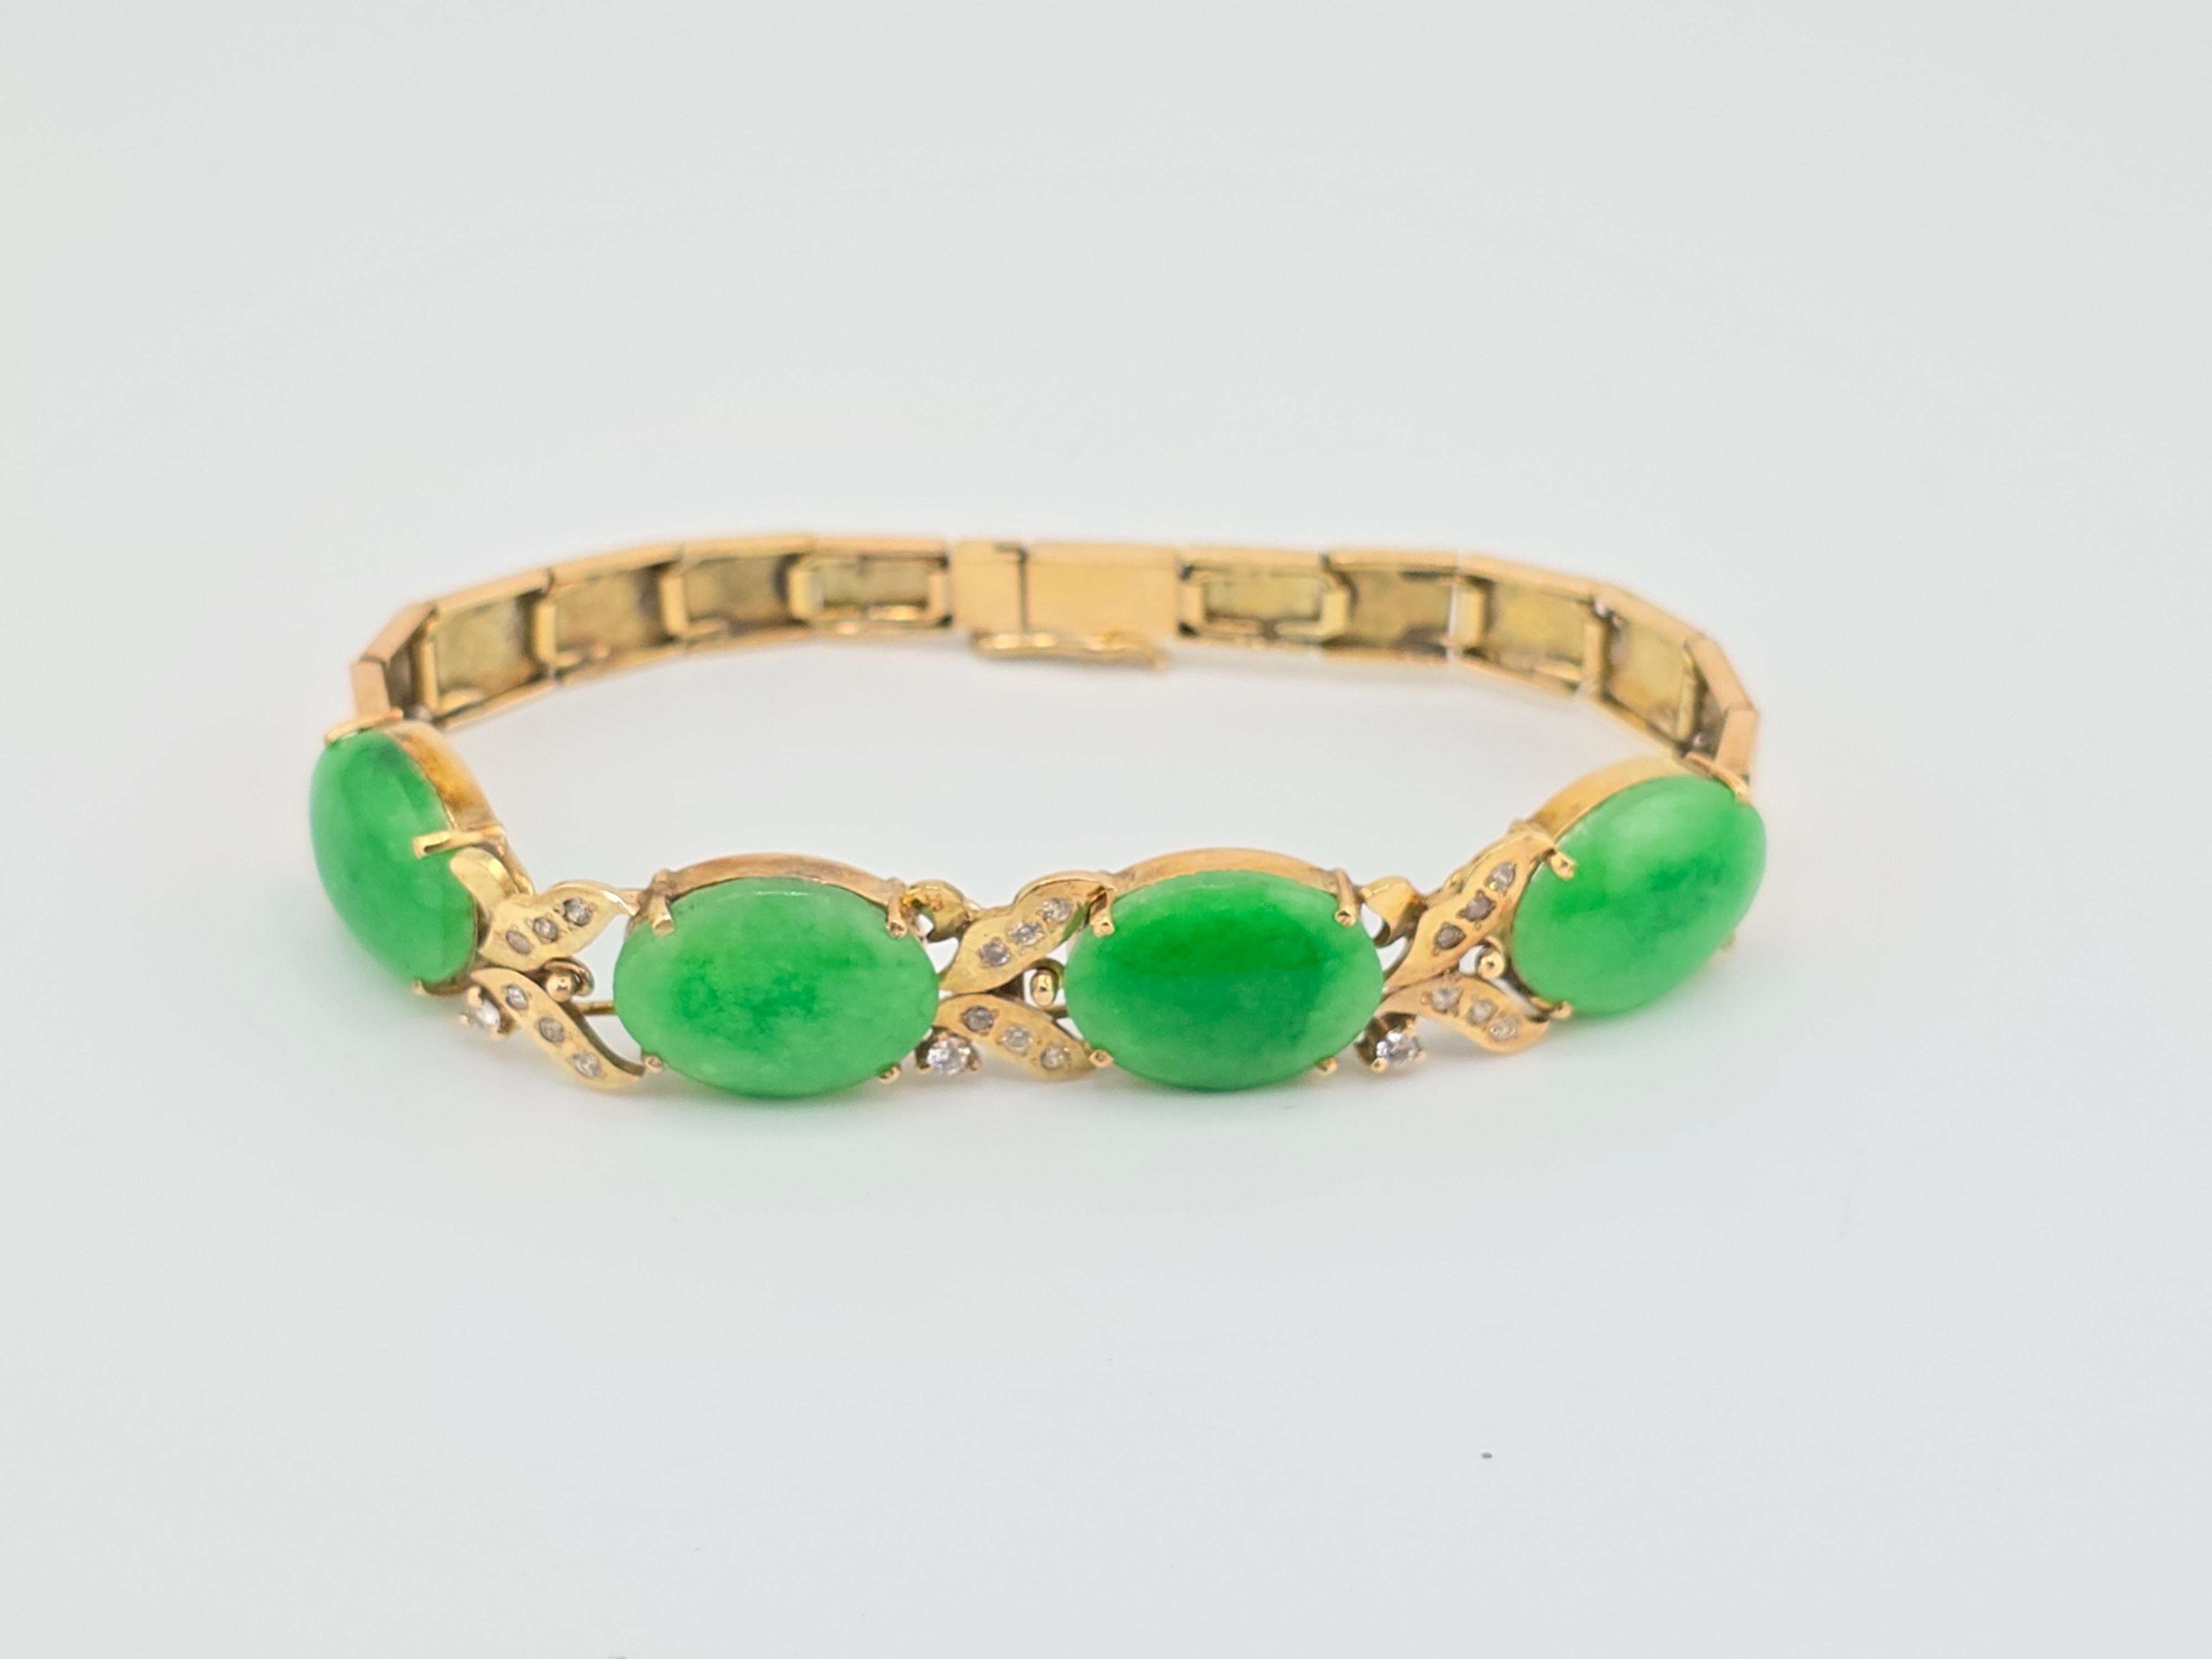 Gorgeous 14K Yellow Gold Diamond & Green Jadeite Jade Bracelet 20.86 Grams In Good Condition For Sale In Media, PA